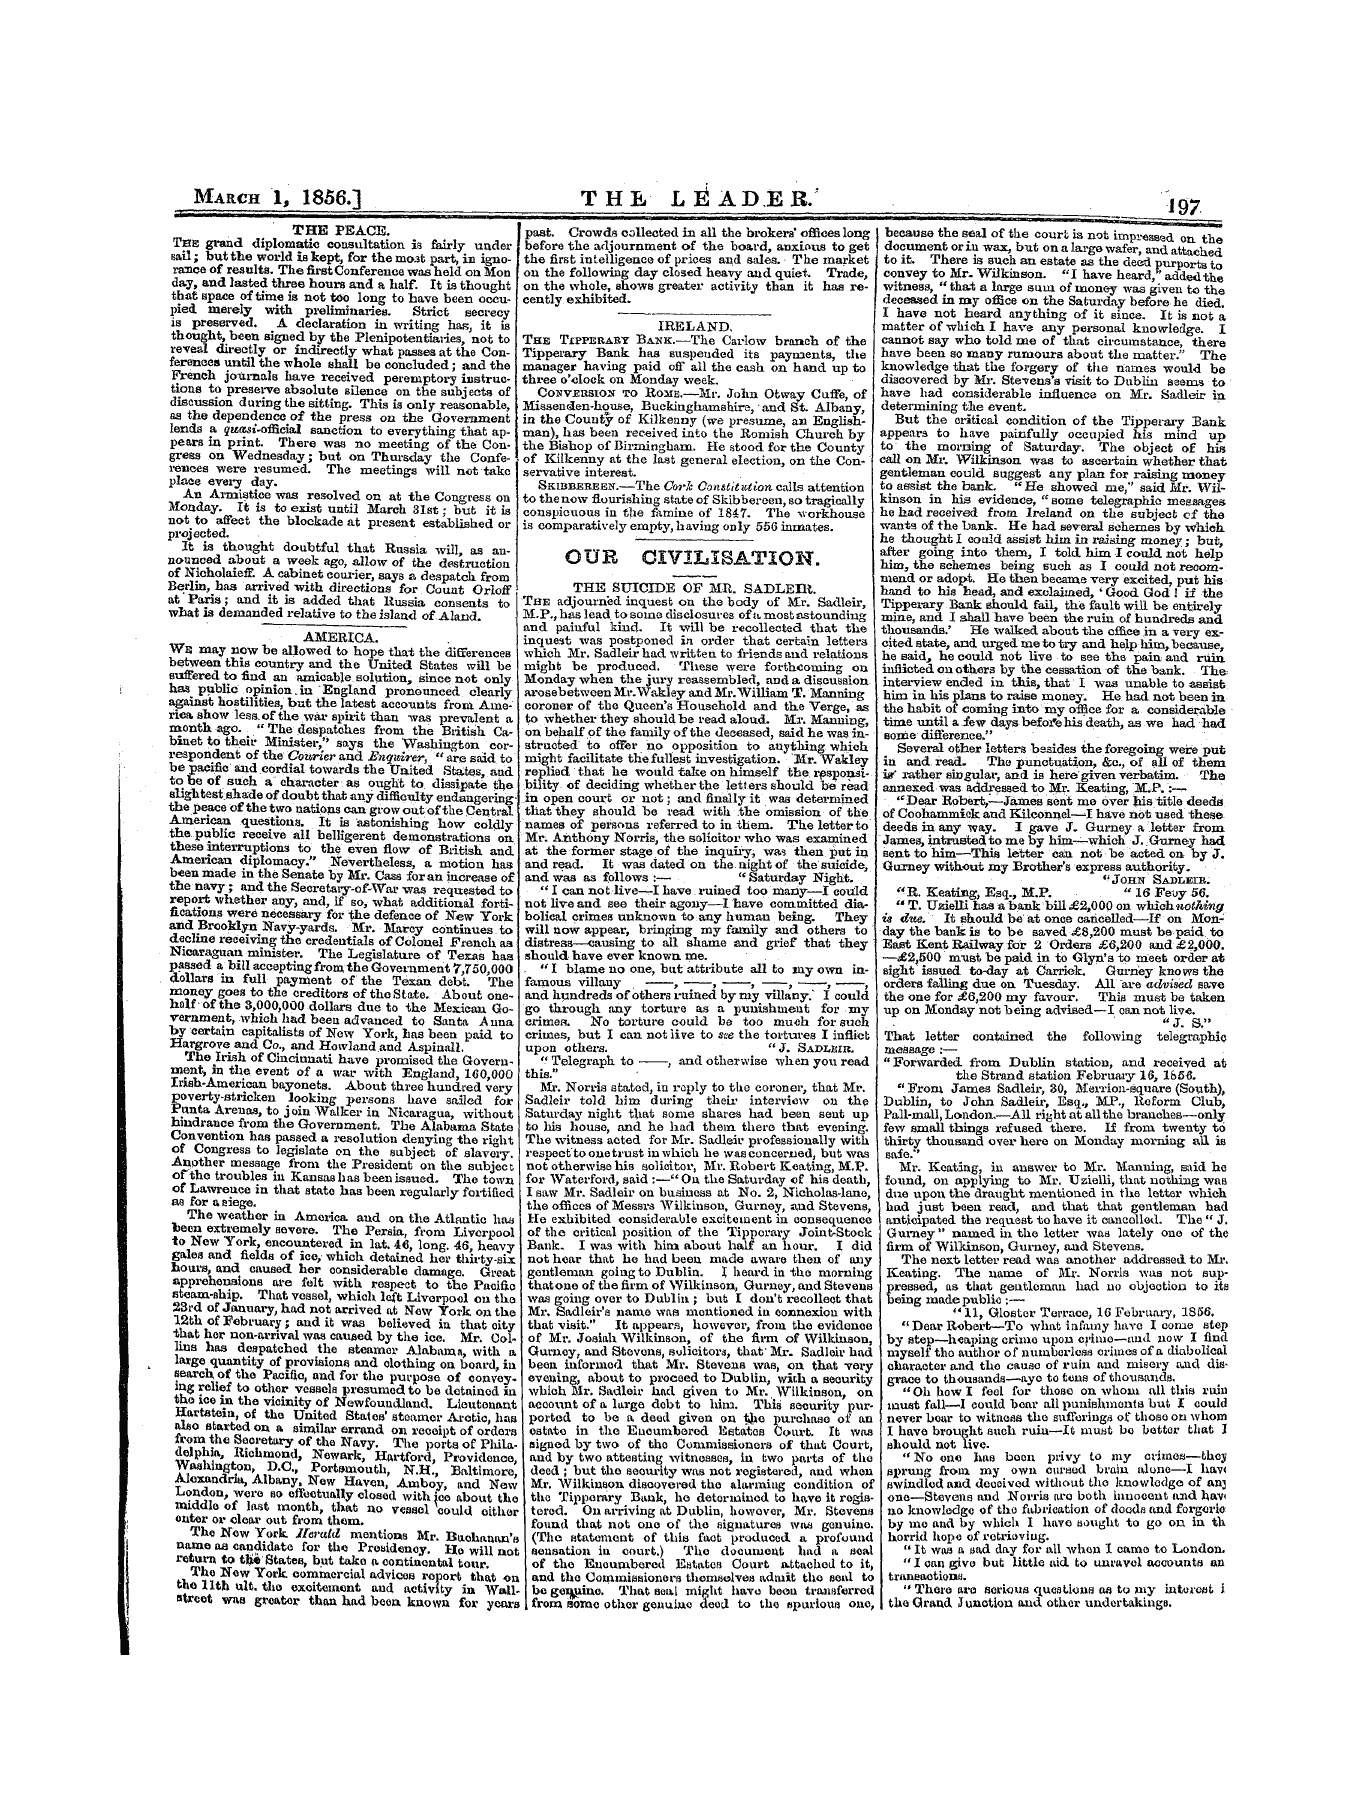 Leader (1850-1860): jS F Y, 1st edition: 5